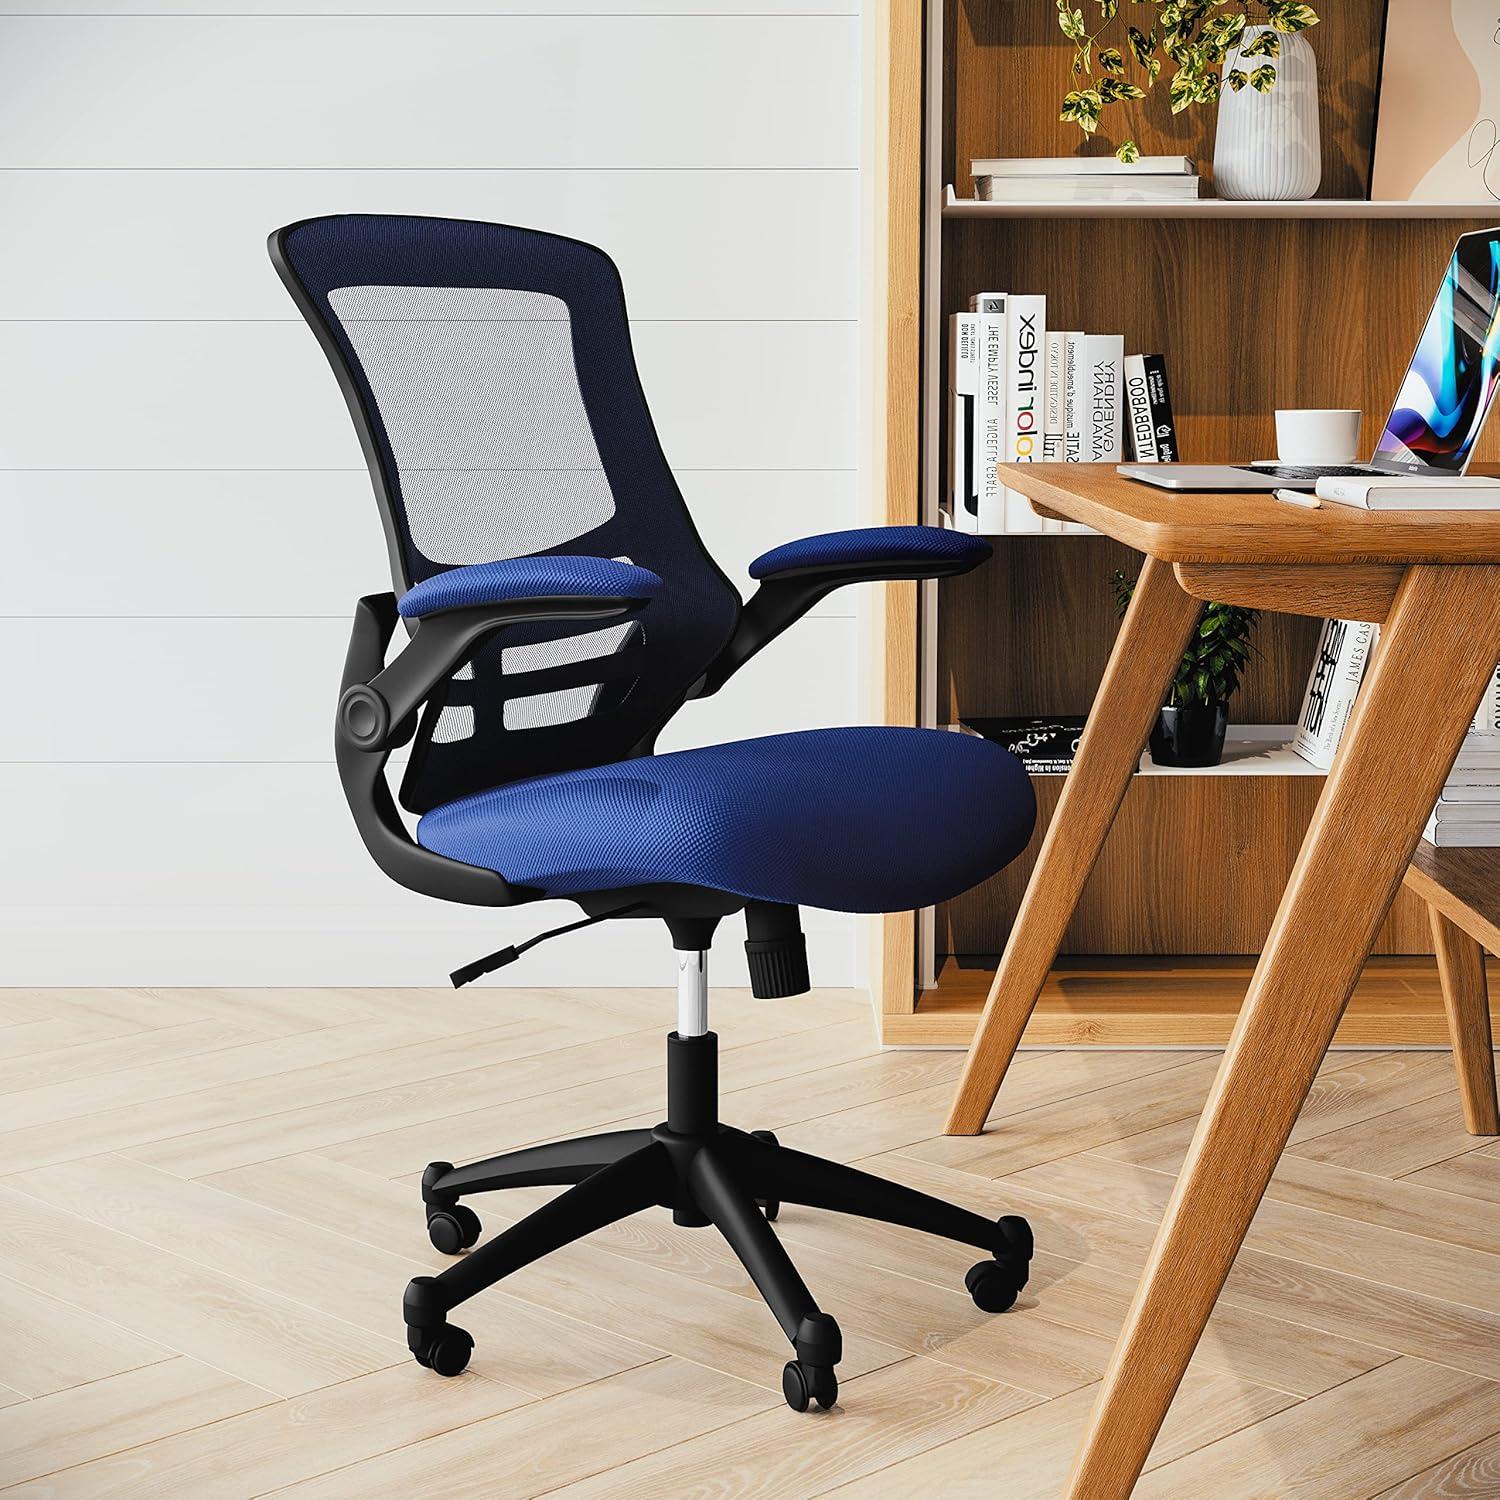 Blue Mesh Mid-Back Ergonomic Office Chair with Adjustable Arms